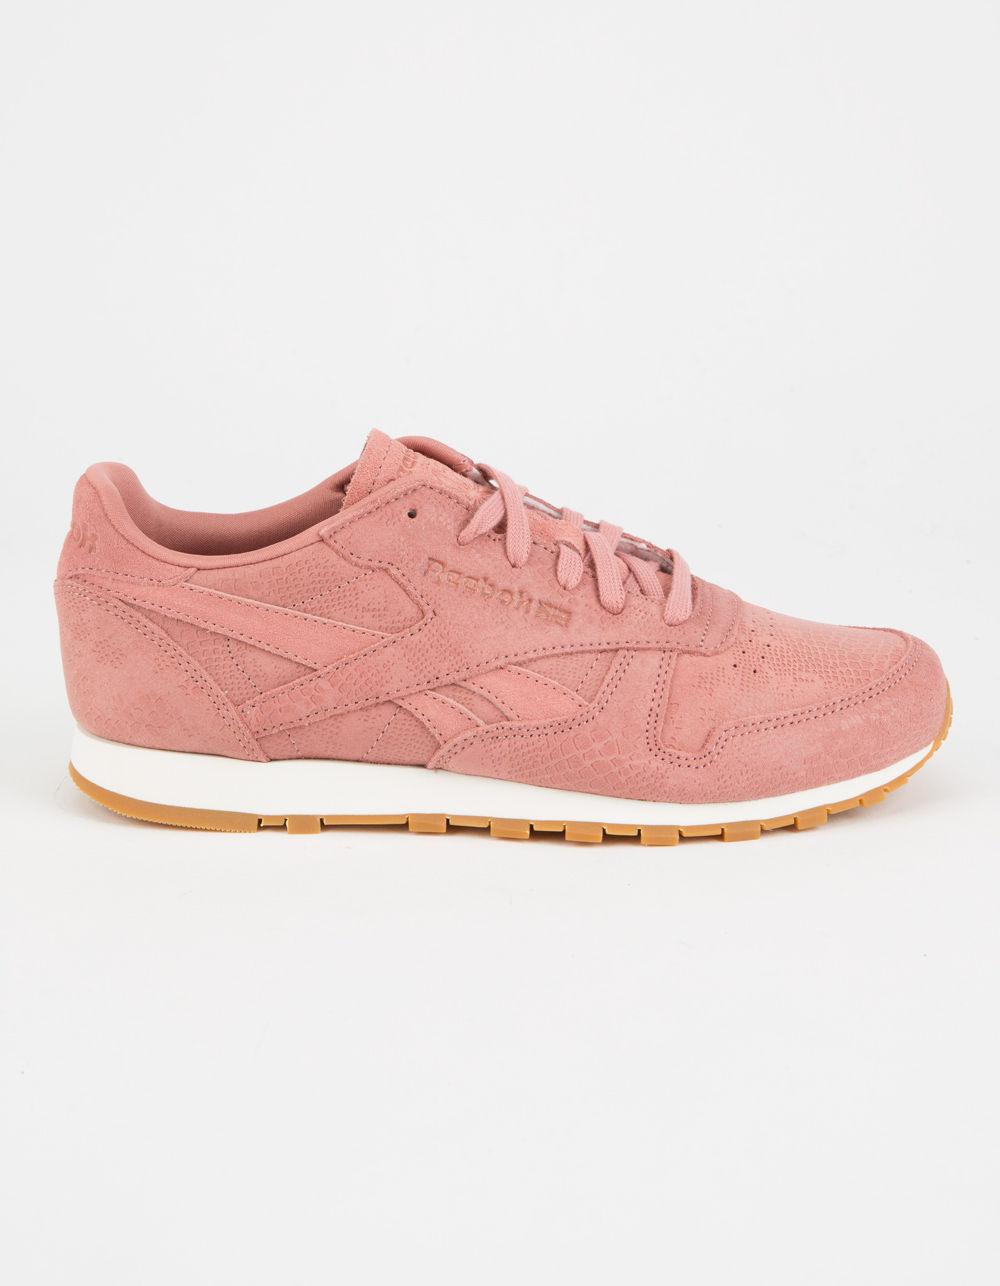 reebok classic leather faux exotic sneakers in pink